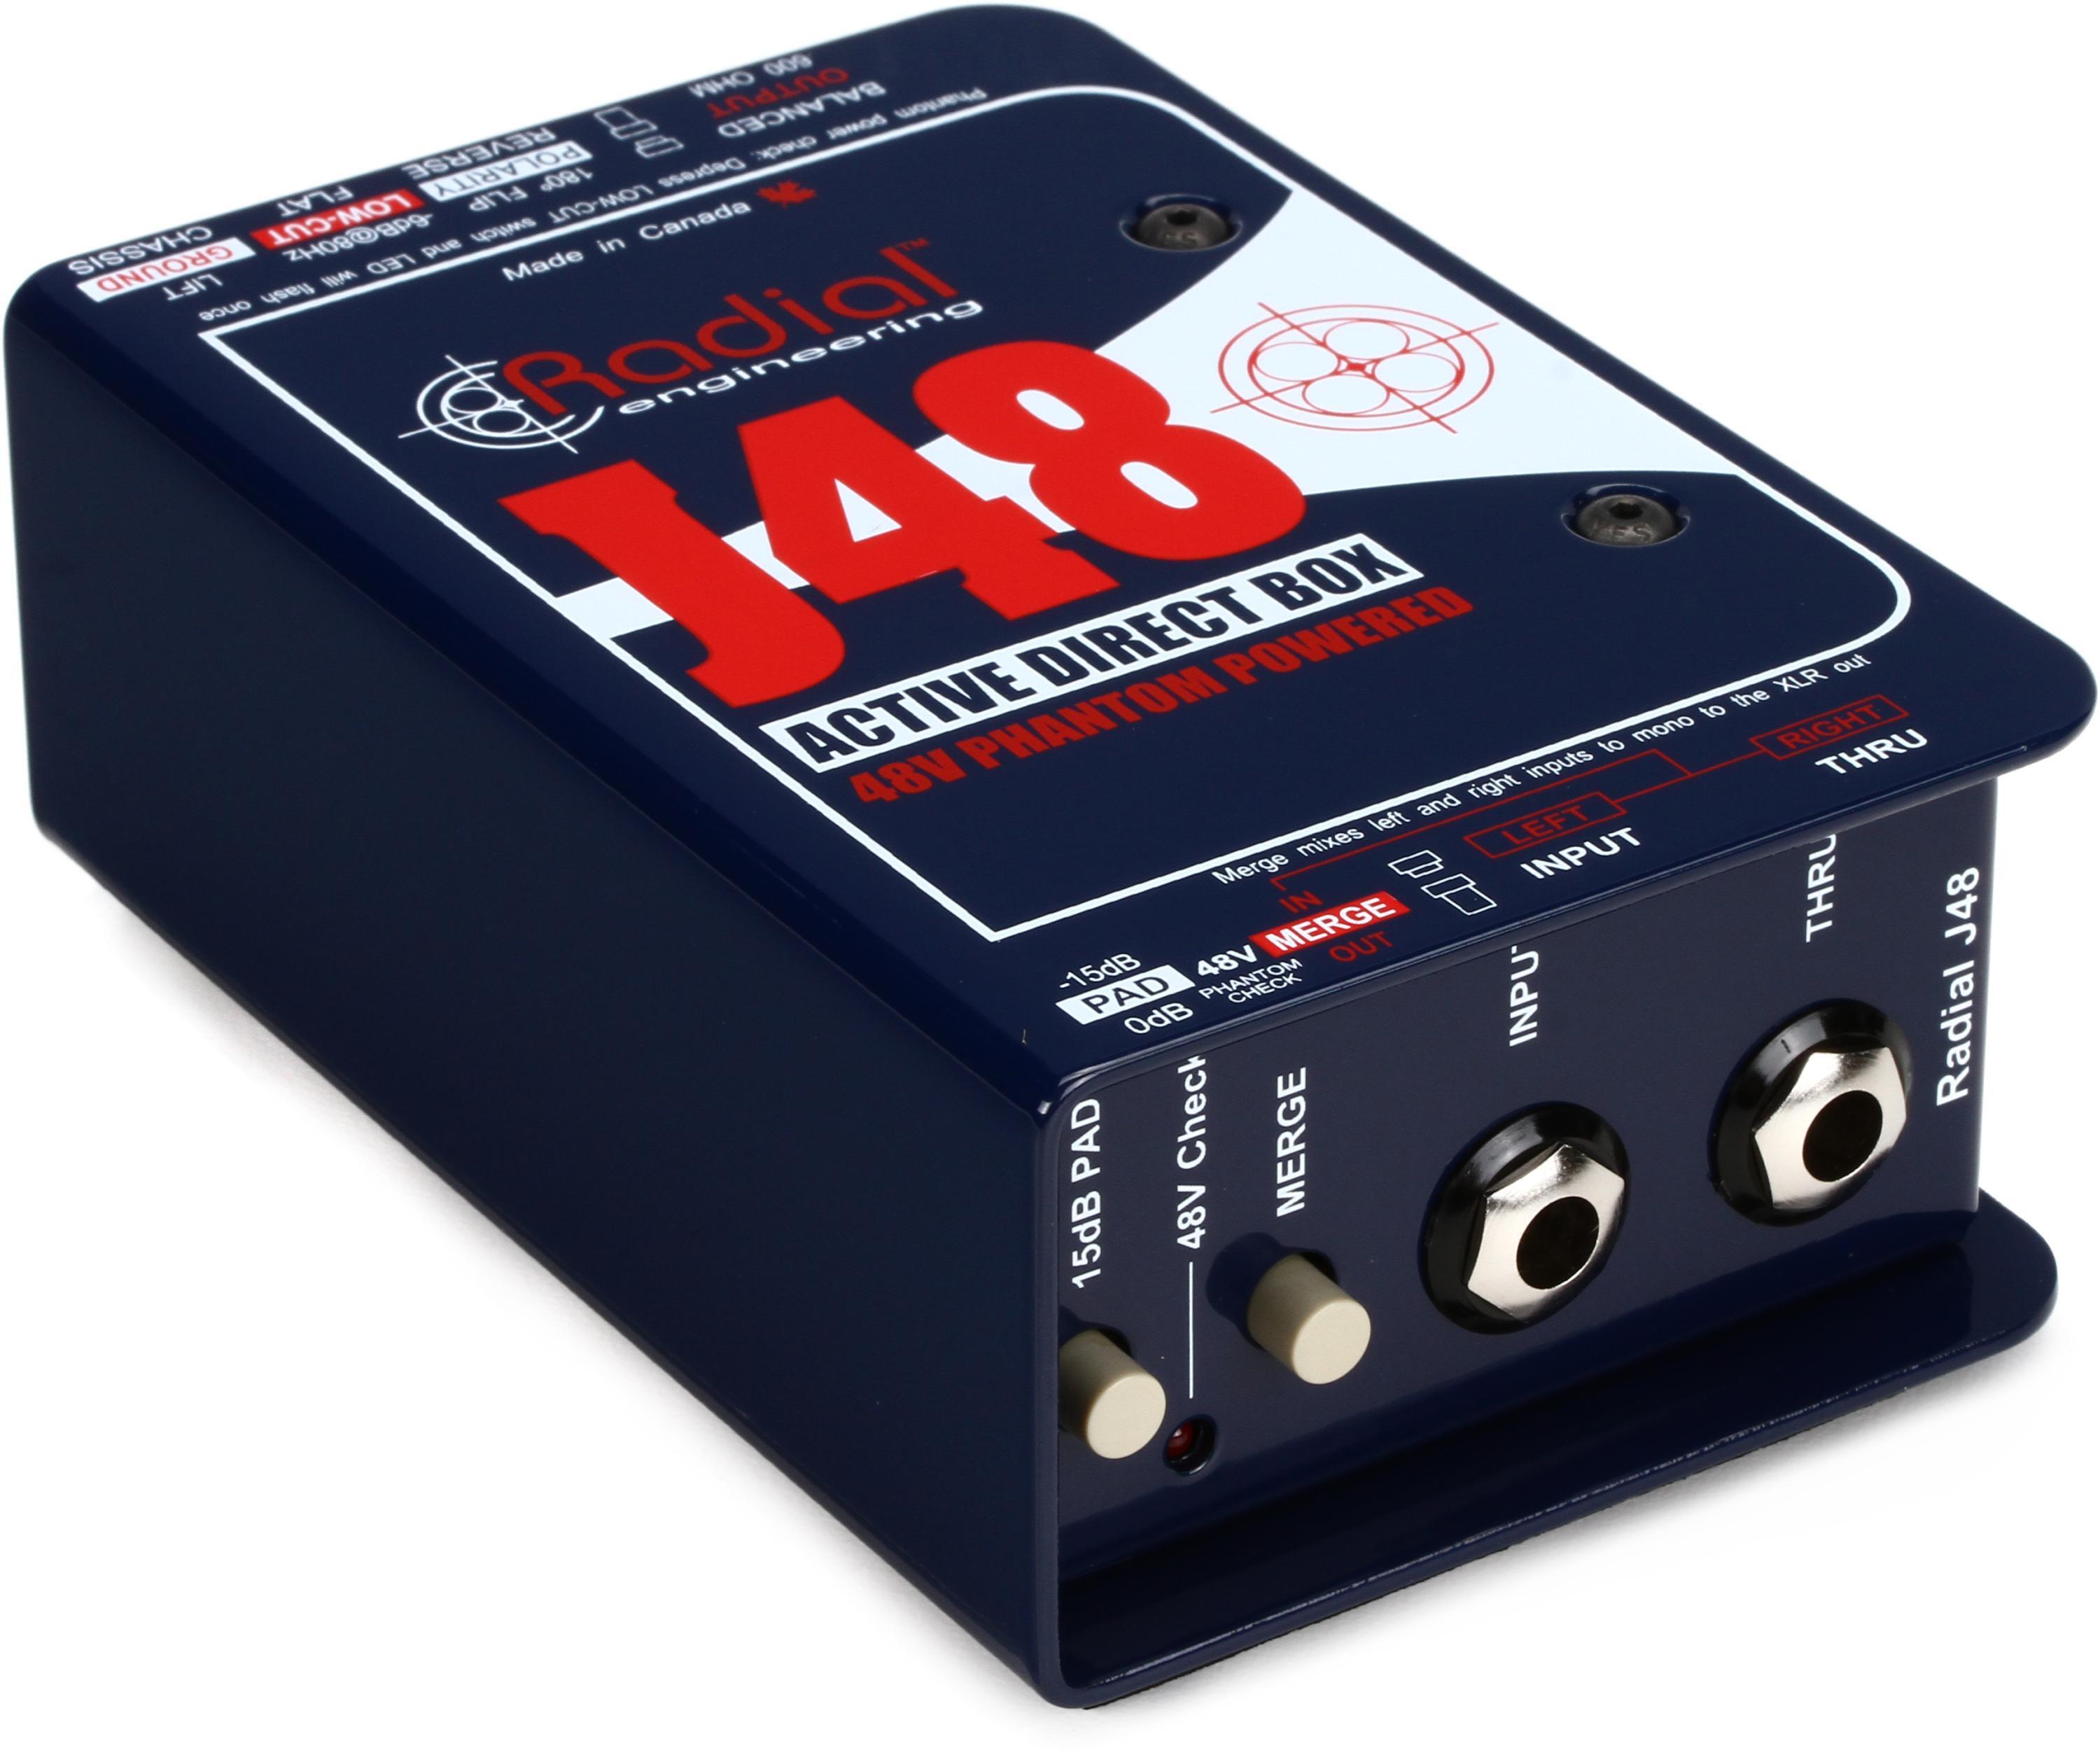 Radial J48 1-channel Active 48v Direct Box | Sweetwater